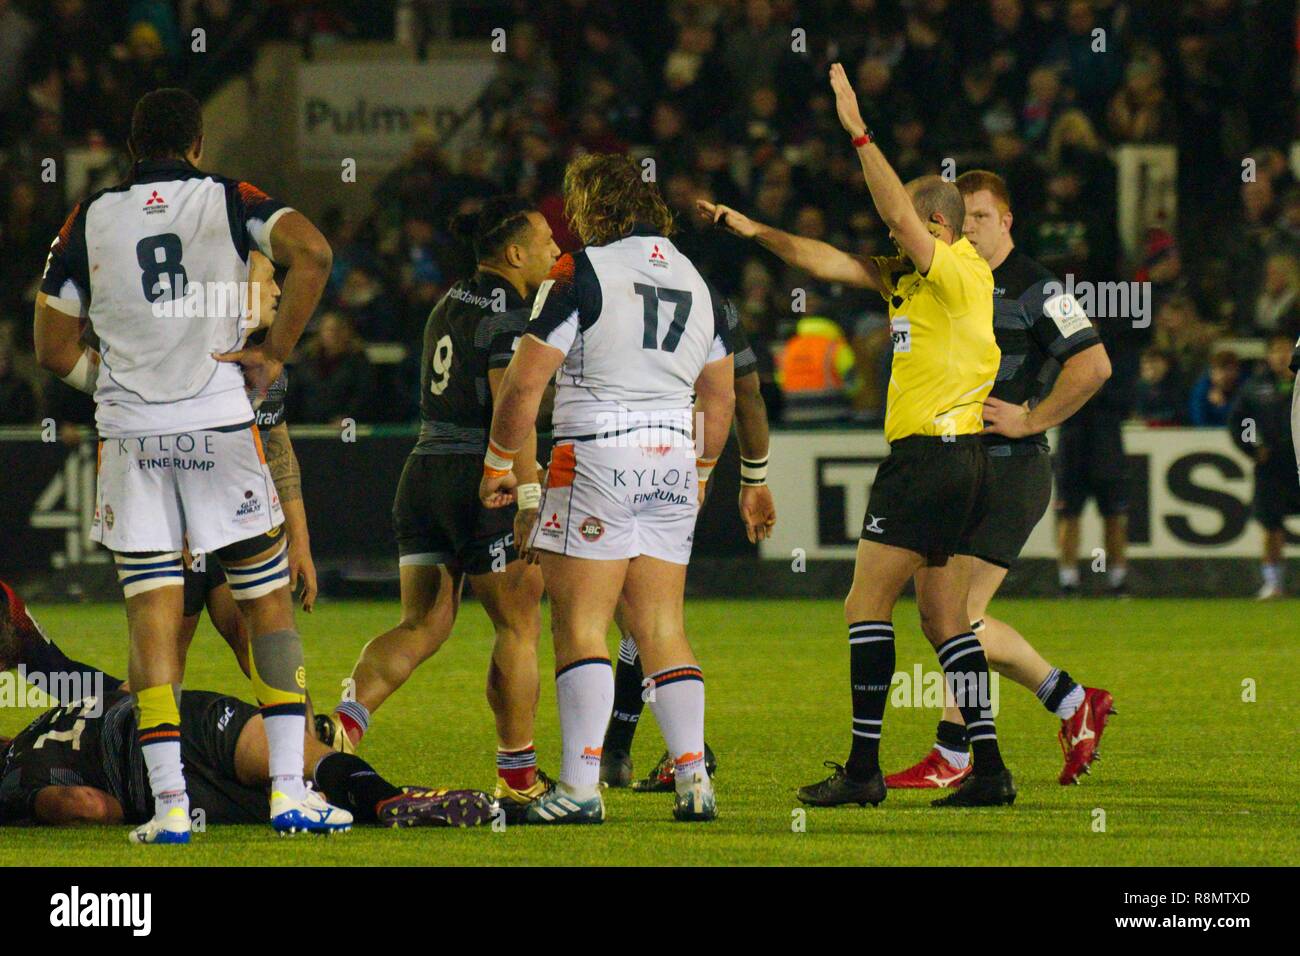 Newcastle upon Tyne, England, 16 December 2018. Referee Alexandre Ruiz signalling a penalty during the Newcastle Falcons v Edinburgh Rugby Heineken Champions Cup match at Kingston Park. Credit: Colin Edwards/Alamy Live News Stock Photo